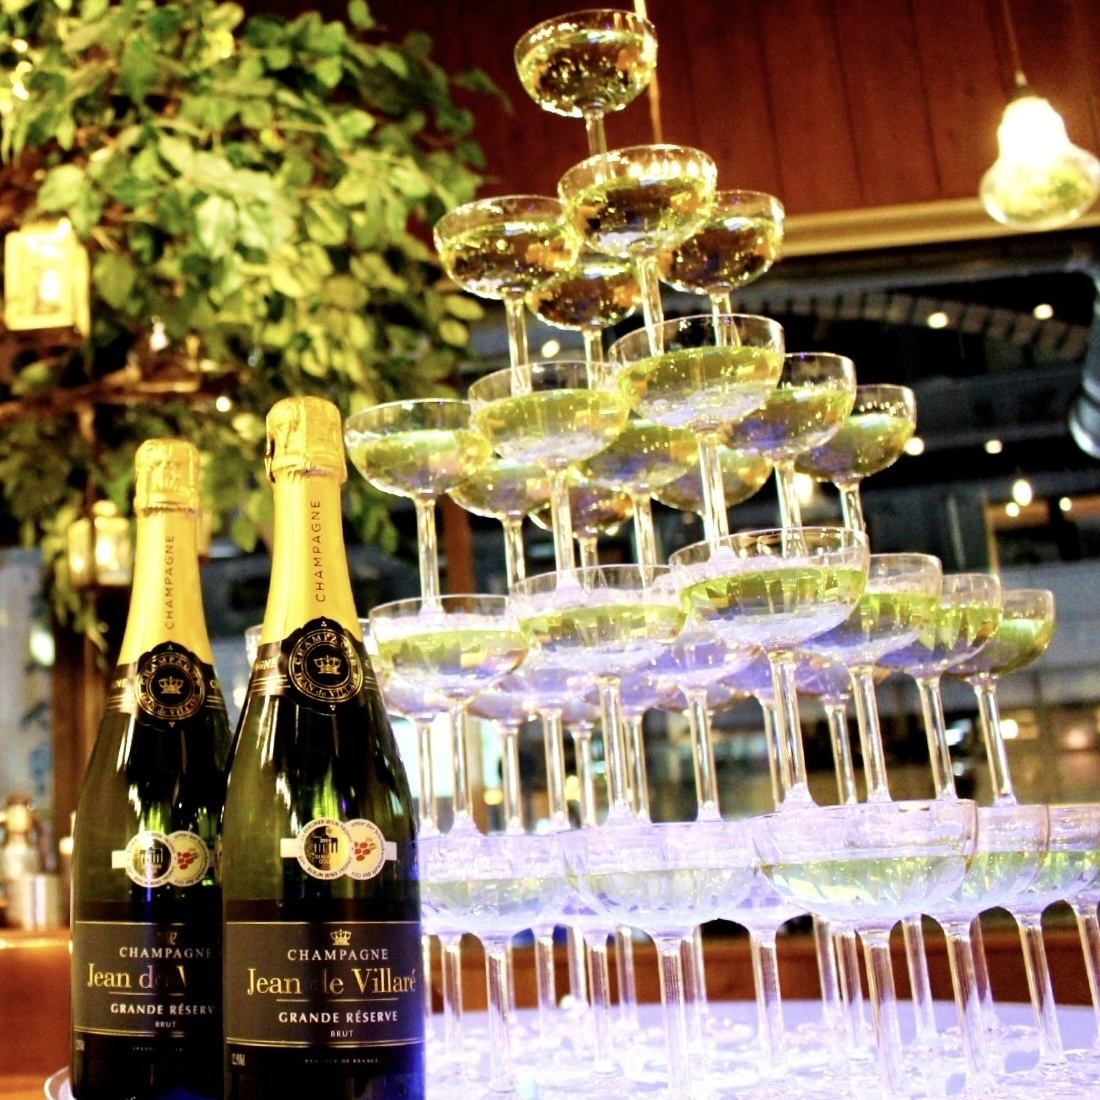 You can even have a champagne tower! There are plenty of other options to liven up your private party! Enjoy your night in Shibuya!